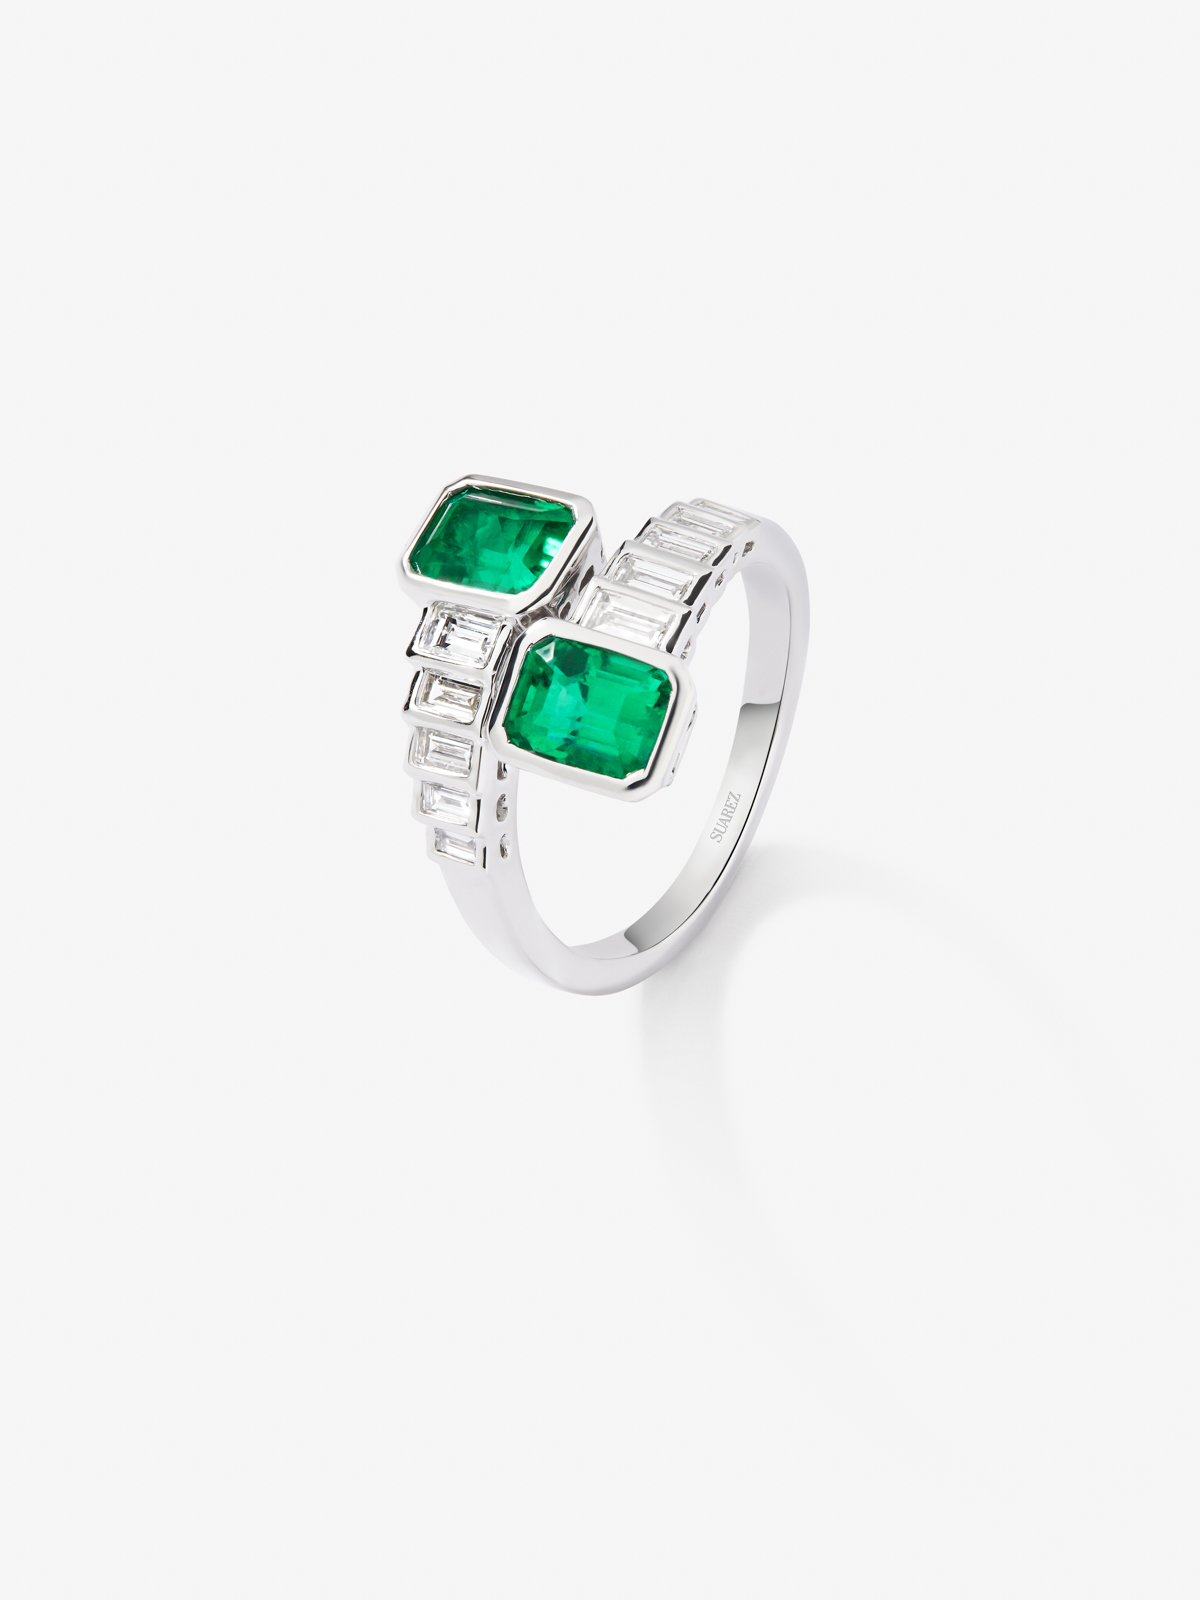 You and I 18k White Gold Ring with Green Emerald